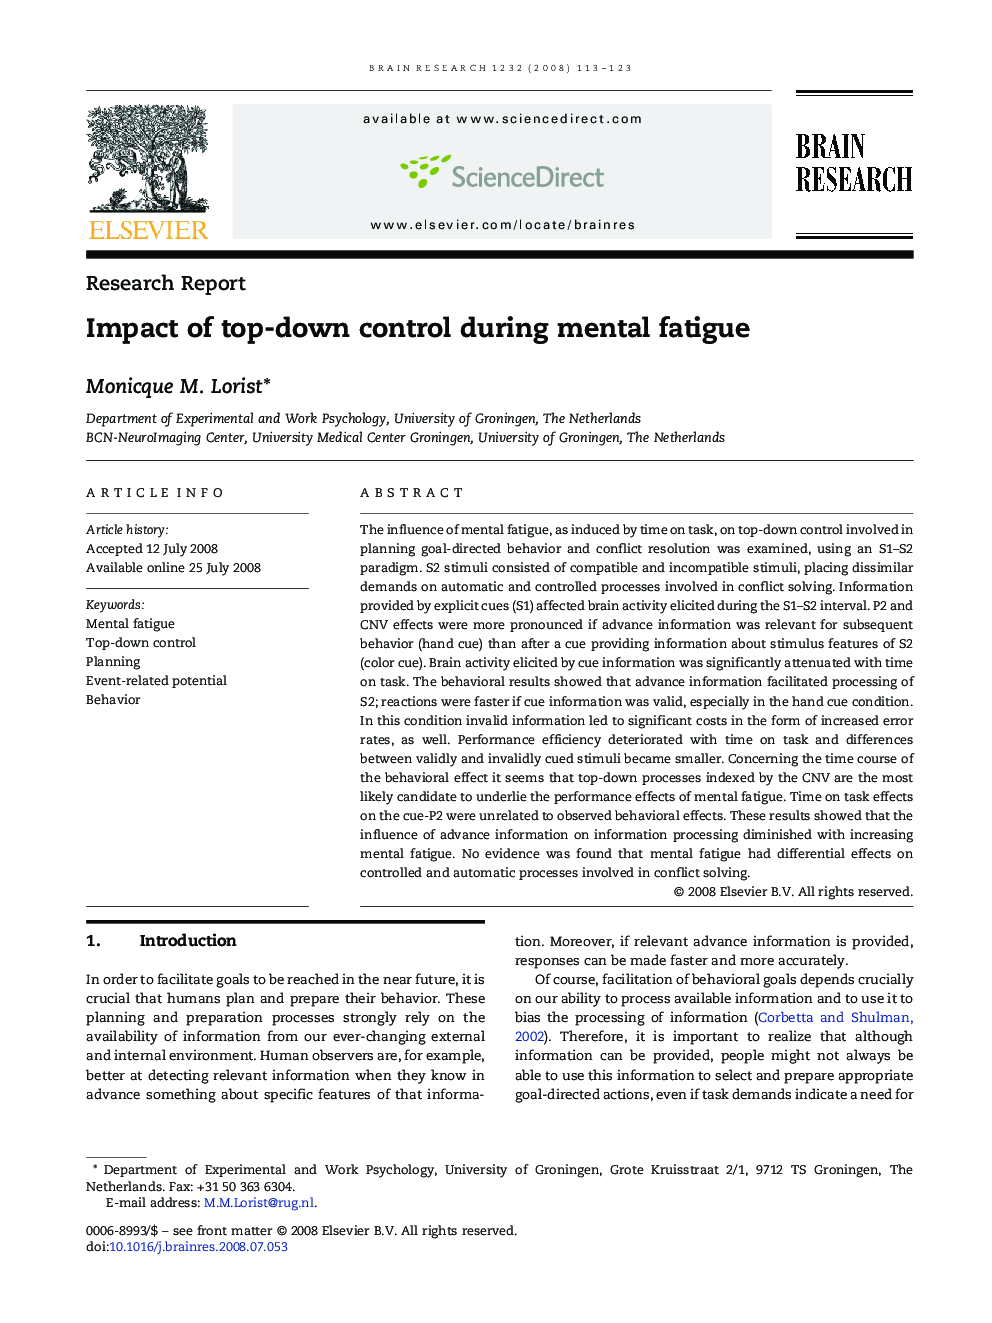 Impact of top-down control during mental fatigue